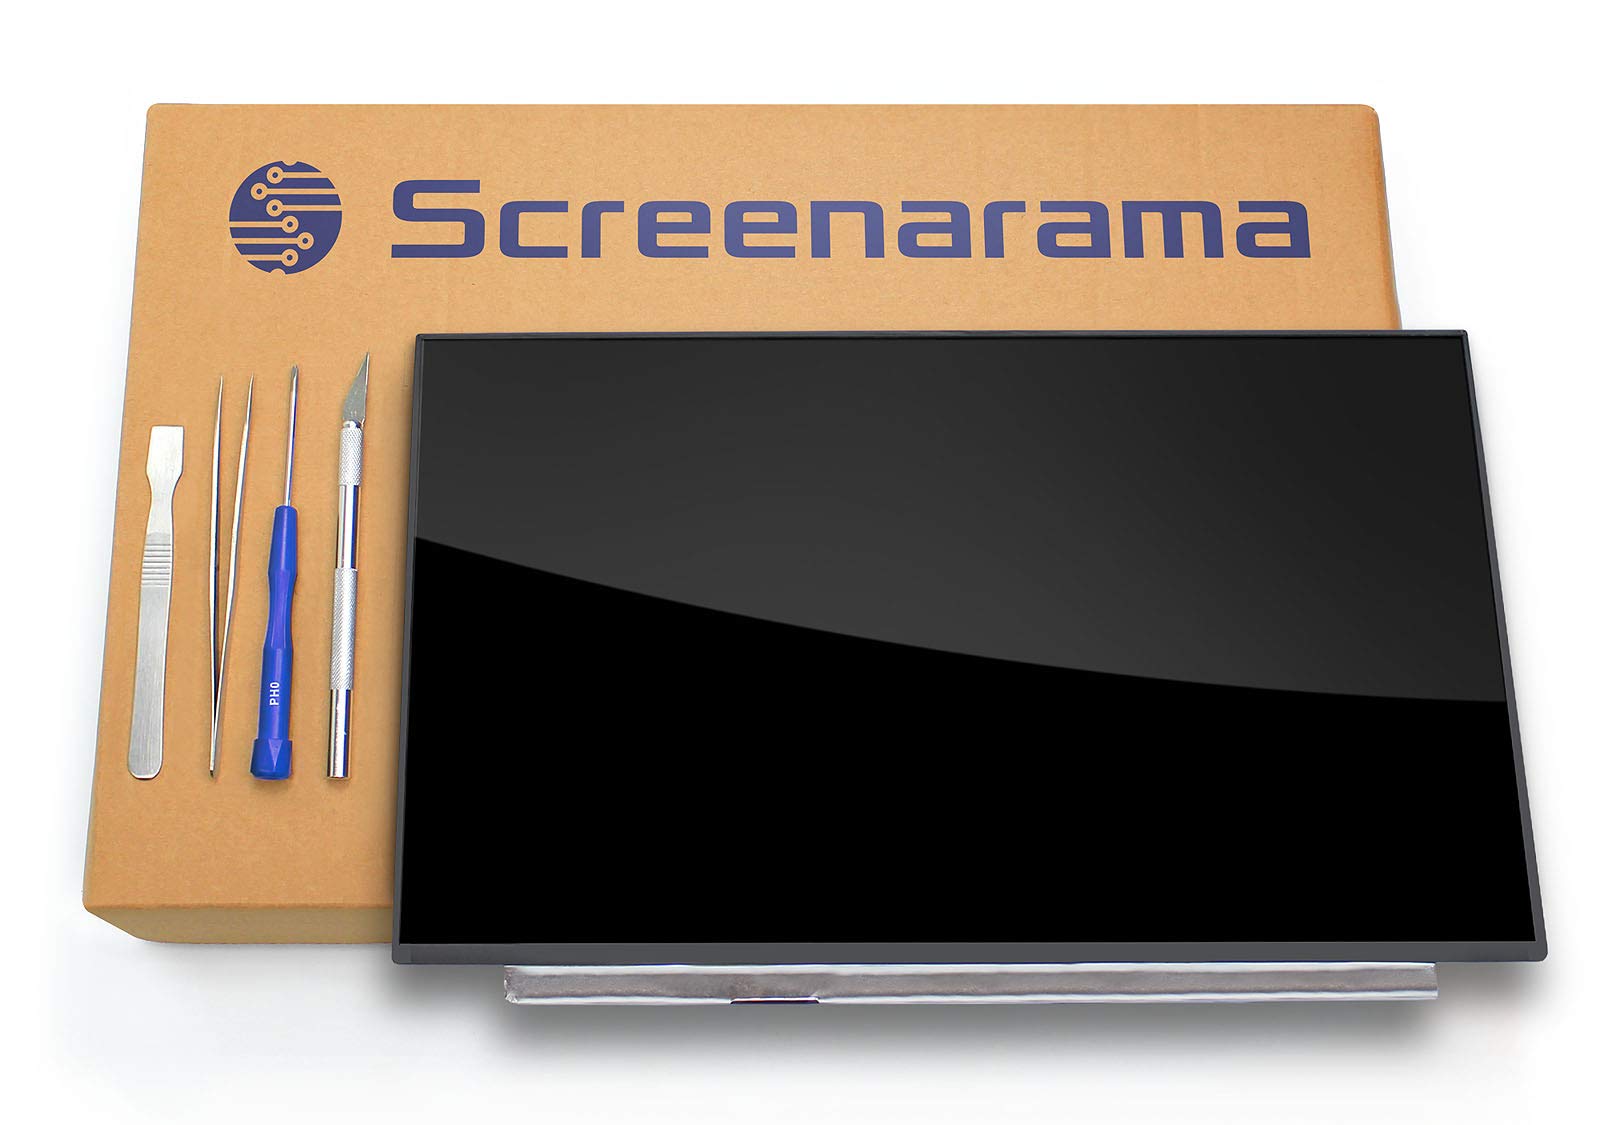 SCREENARAMA New Screen Replacement for Toshiba Chromebook CB35-B3340, FHD 1920x1080, IPS, Matte, LCD LED Display with Tools